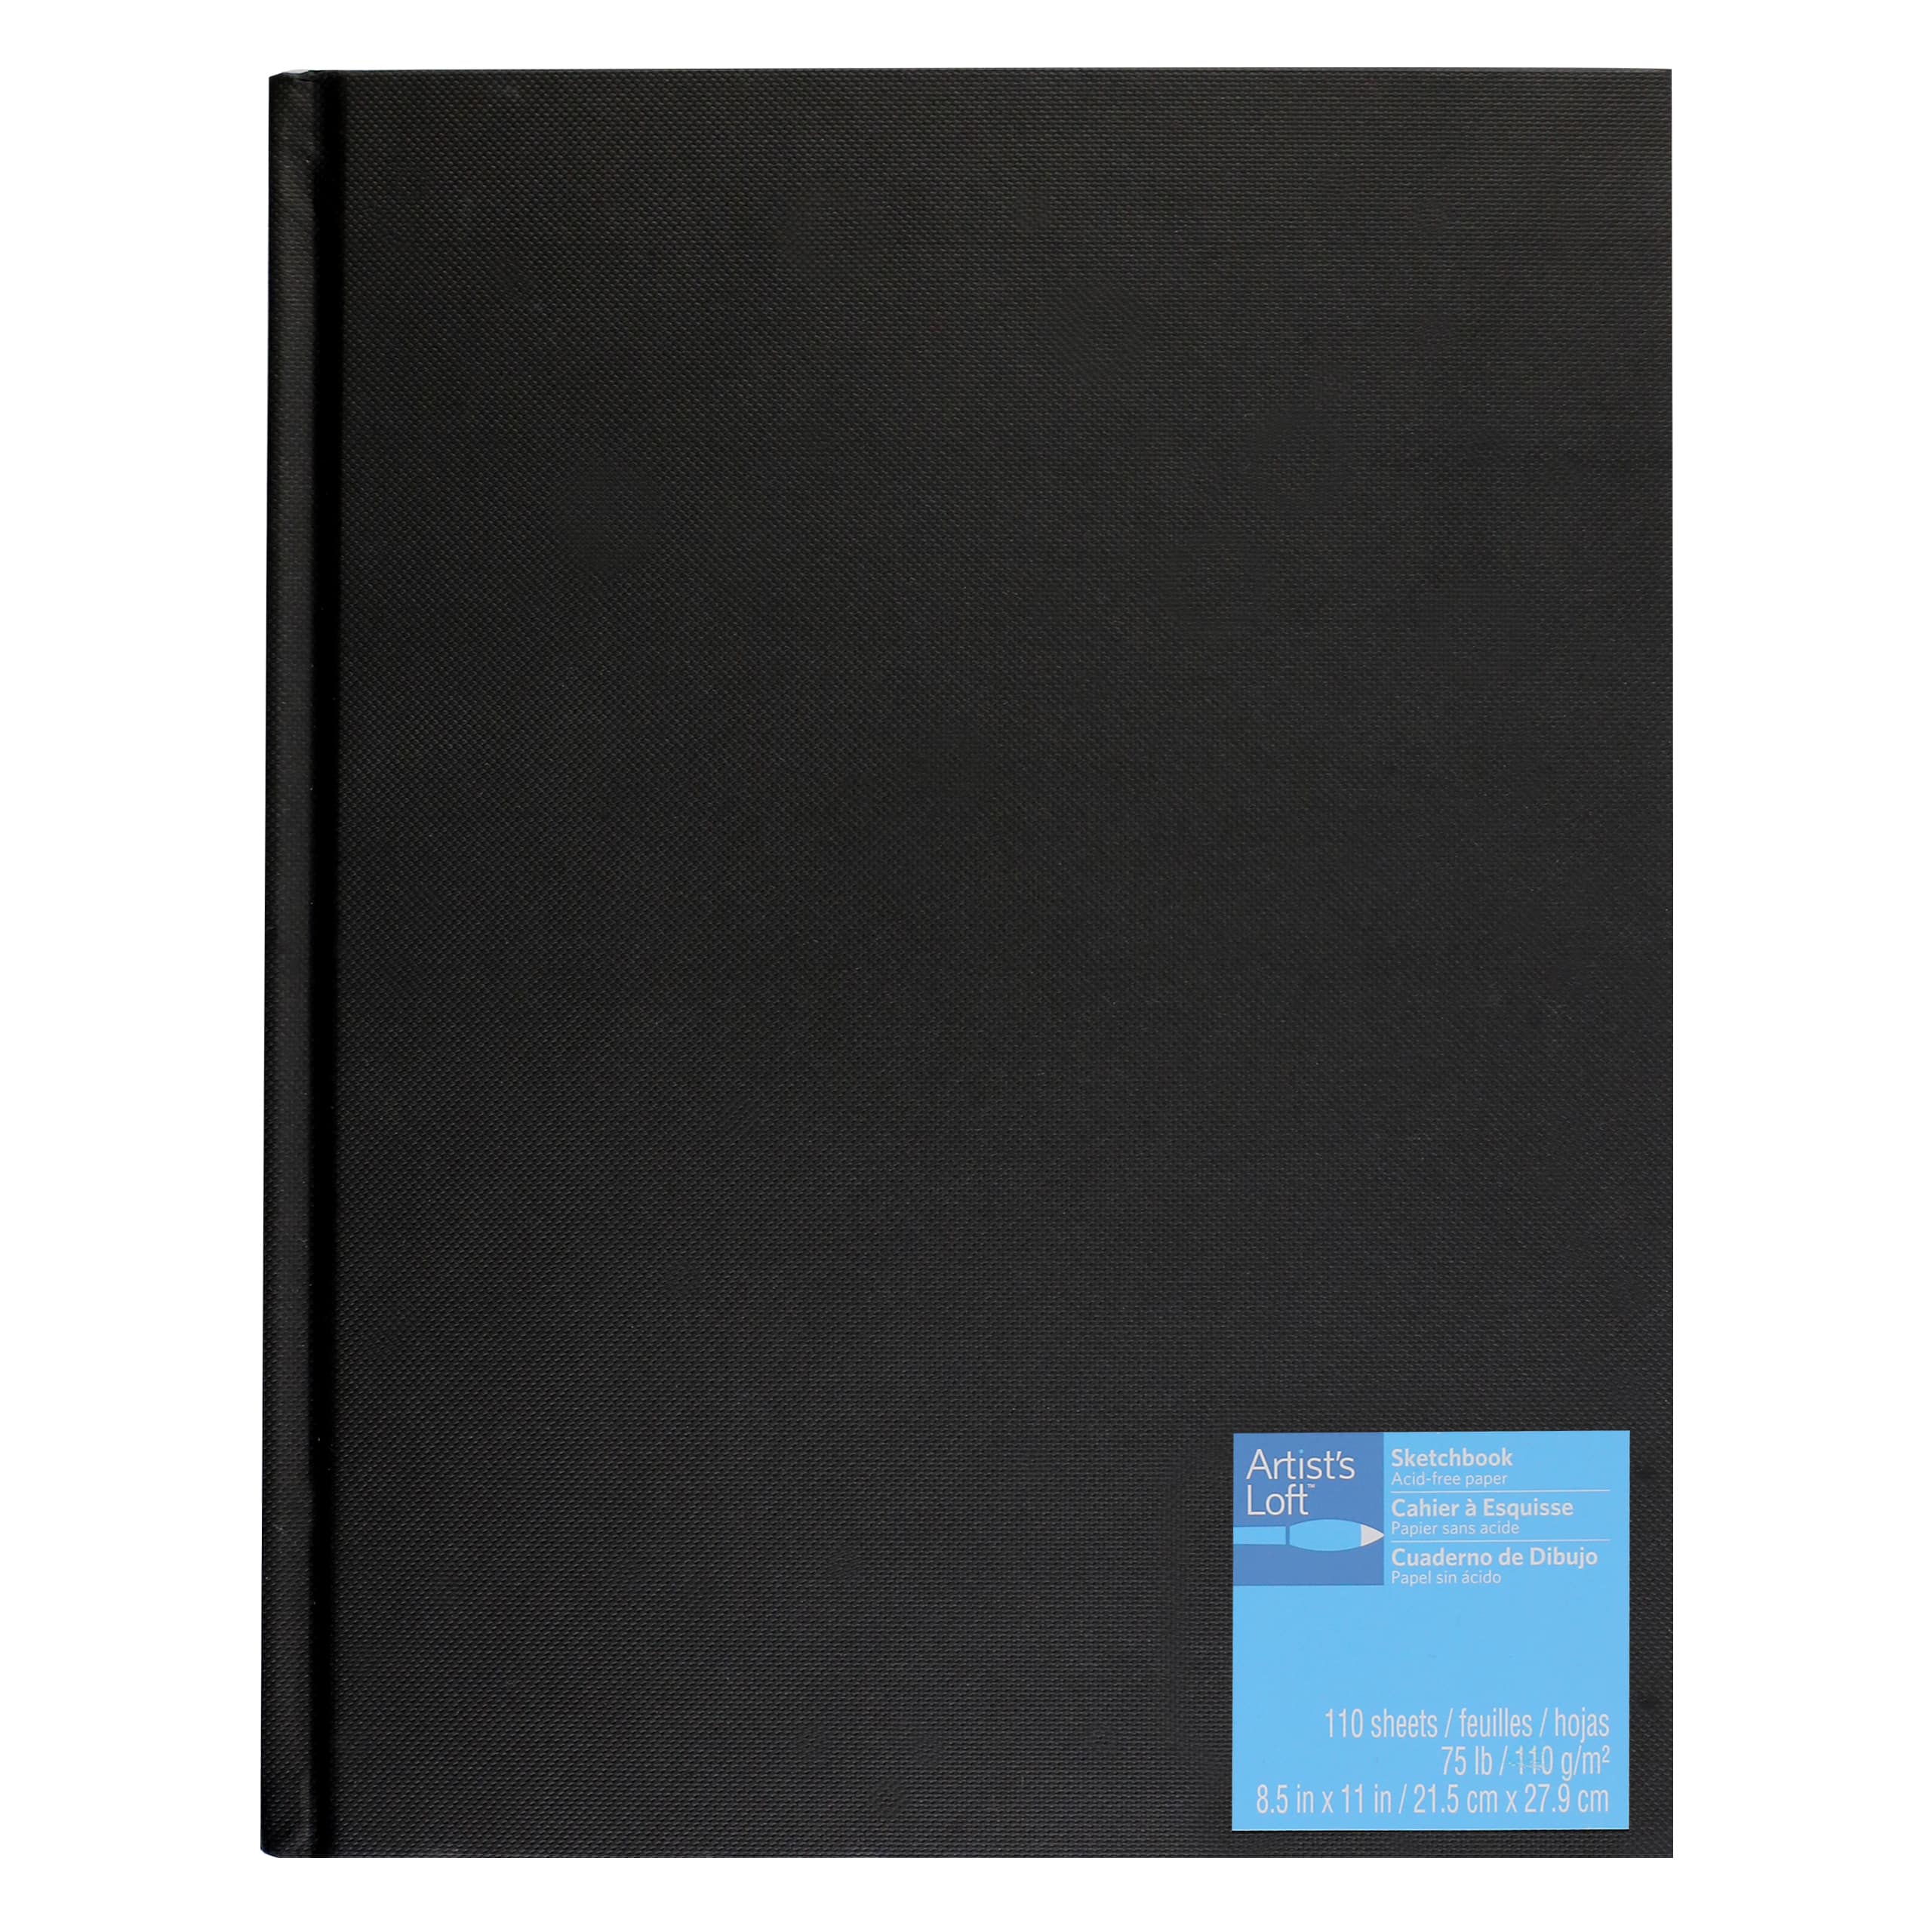 Sketchbook For Colored Pencil: Blank Paper Notebook for Drawing, Panting,  Writing, Sketching or Doodling / Drawing Pad for Kids / Large Size 8.5 x 11